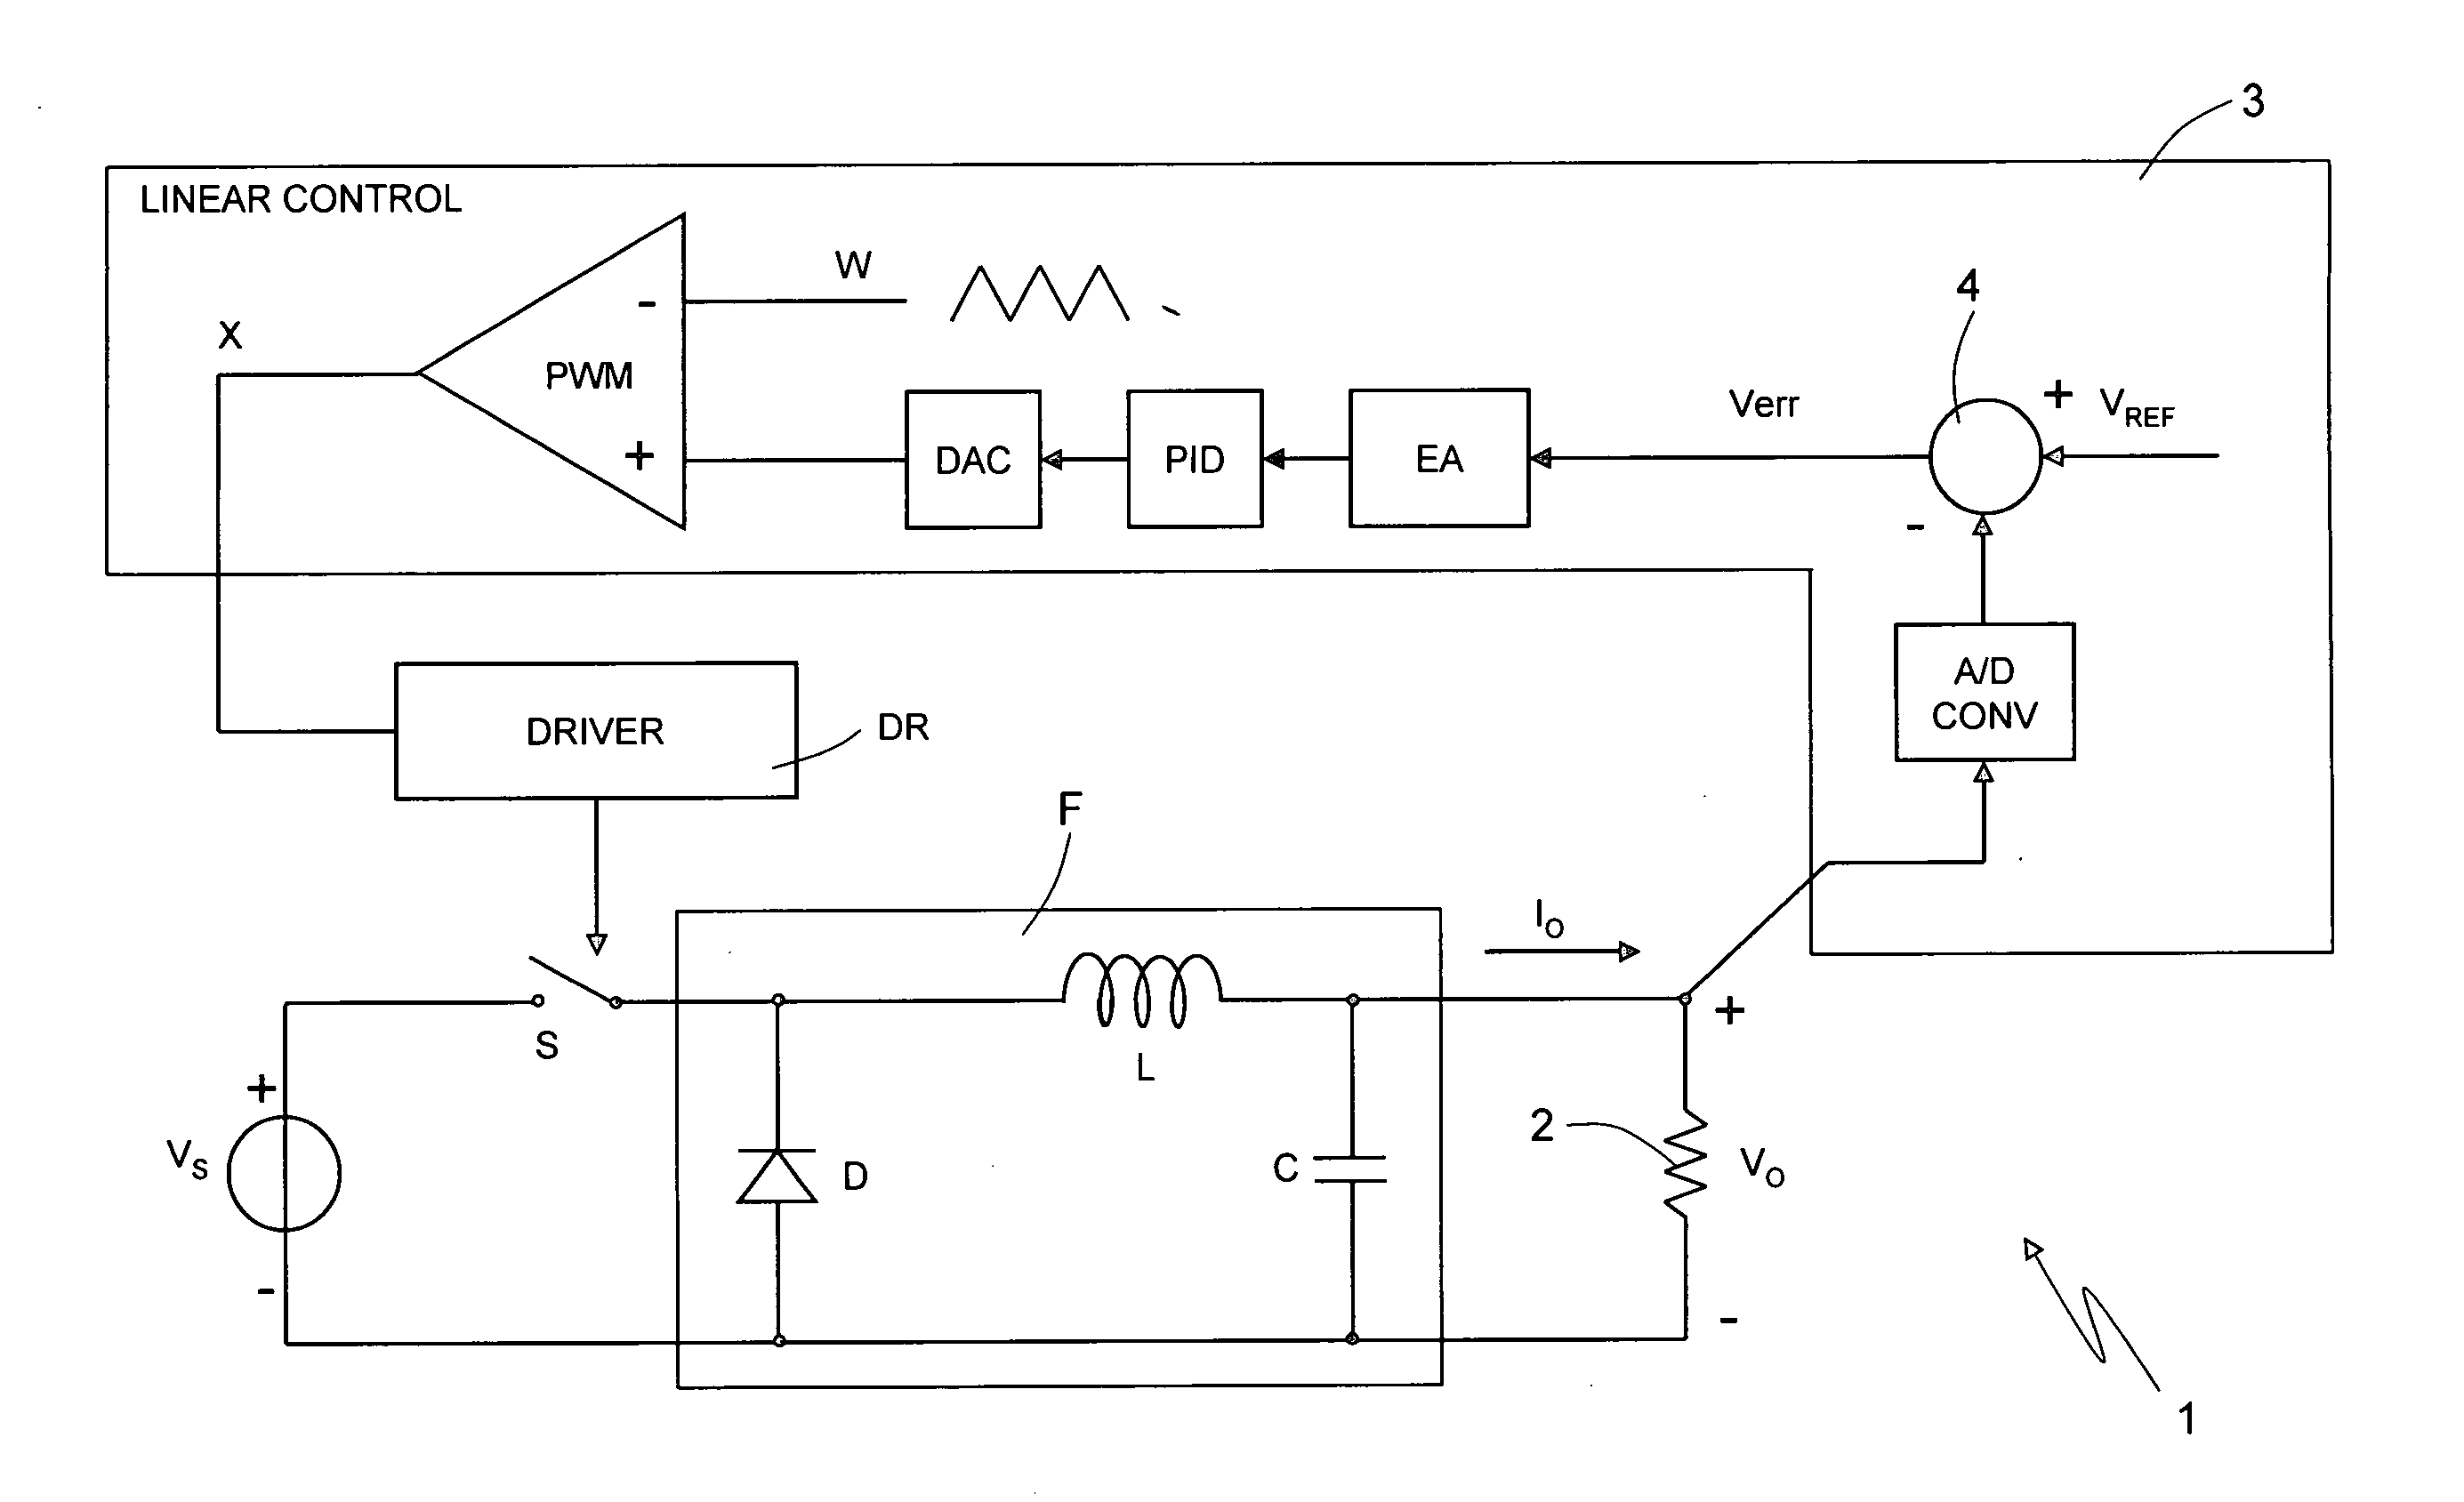 Nonlinear digital control circuit and method for a DC/DC converter